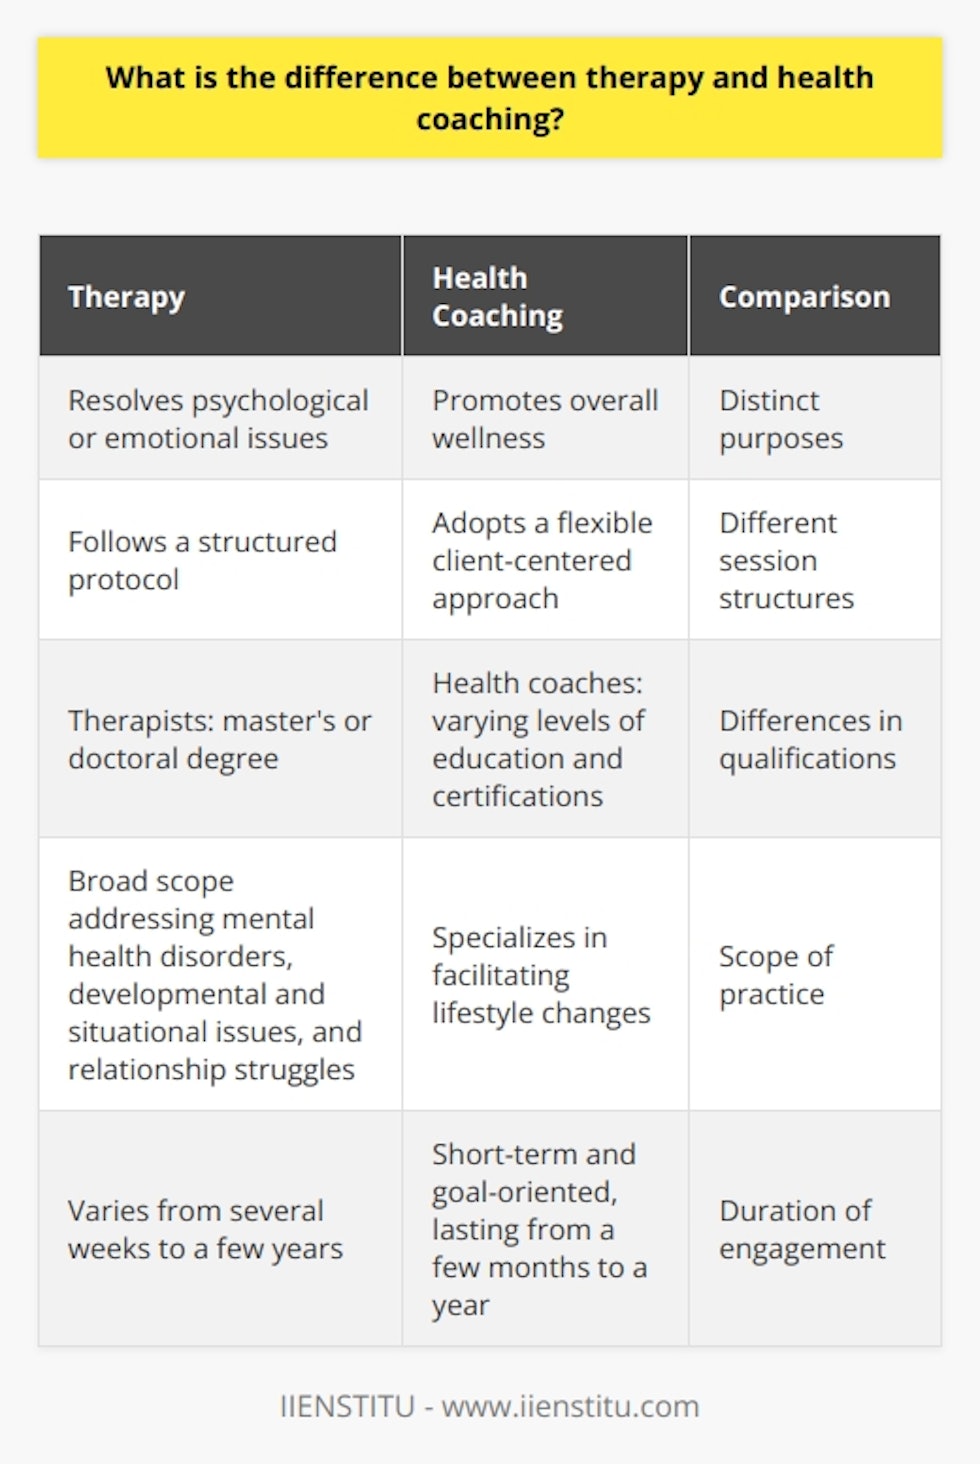 Therapy and health coaching serve distinct purposes in supporting individuals' mental and physical wellbeing. Therapy primarily aims to resolve psychological or emotional issues, such as depression, anxiety, or trauma, by providing support and utilizing evidence-based techniques. In contrast, health coaching focuses on promoting overall wellness by helping individuals achieve their health-related goals, like nutrition, exercise, and stress management.The structure of therapy sessions often follows a structured protocol, with therapists utilizing evidence-based techniques to assist clients in processing emotions, managing thoughts, and developing coping strategies. Health coaching sessions, on the other hand, adopt a more flexible client-centered approach, providing customized guidance that meets the unique needs and preferences of each individual.Regarding qualifications, therapists typically possess a master's or doctoral degree in fields such as psychology, counseling, or social work. They also undergo extensive supervised clinical experience. Health coaches, while knowledgeable and skilled in certain areas of wellness, hold varying levels of formal education and professional certifications. However, there is no mandatory unified or standardized training process for health coaches.The scope of practice for therapists is broader, as they can address a wide range of mental health disorders, developmental and situational issues, and relationship struggles. Health coaches specialize in facilitating lifestyle changes, focusing on areas such as diet, exercise, sleep, and stress management, to improve overall wellbeing.The duration of engagement with a therapist varies depending on the nature of the problem being addressed, often ranging from several weeks to a few years as clients work through deep-seated issues. Health coaching engagements, on the other hand, tend to be more short-term and goal-oriented, typically lasting anywhere from a few months to a year, depending on the client's objectives.Understanding the differences between therapy and health coaching is crucial in determining the most suitable support option for one's mental and physical wellbeing. Therapy is recommended for those seeking to address psychological or emotional issues, while health coaching focuses on achieving health-related goals in various domains of wellness.